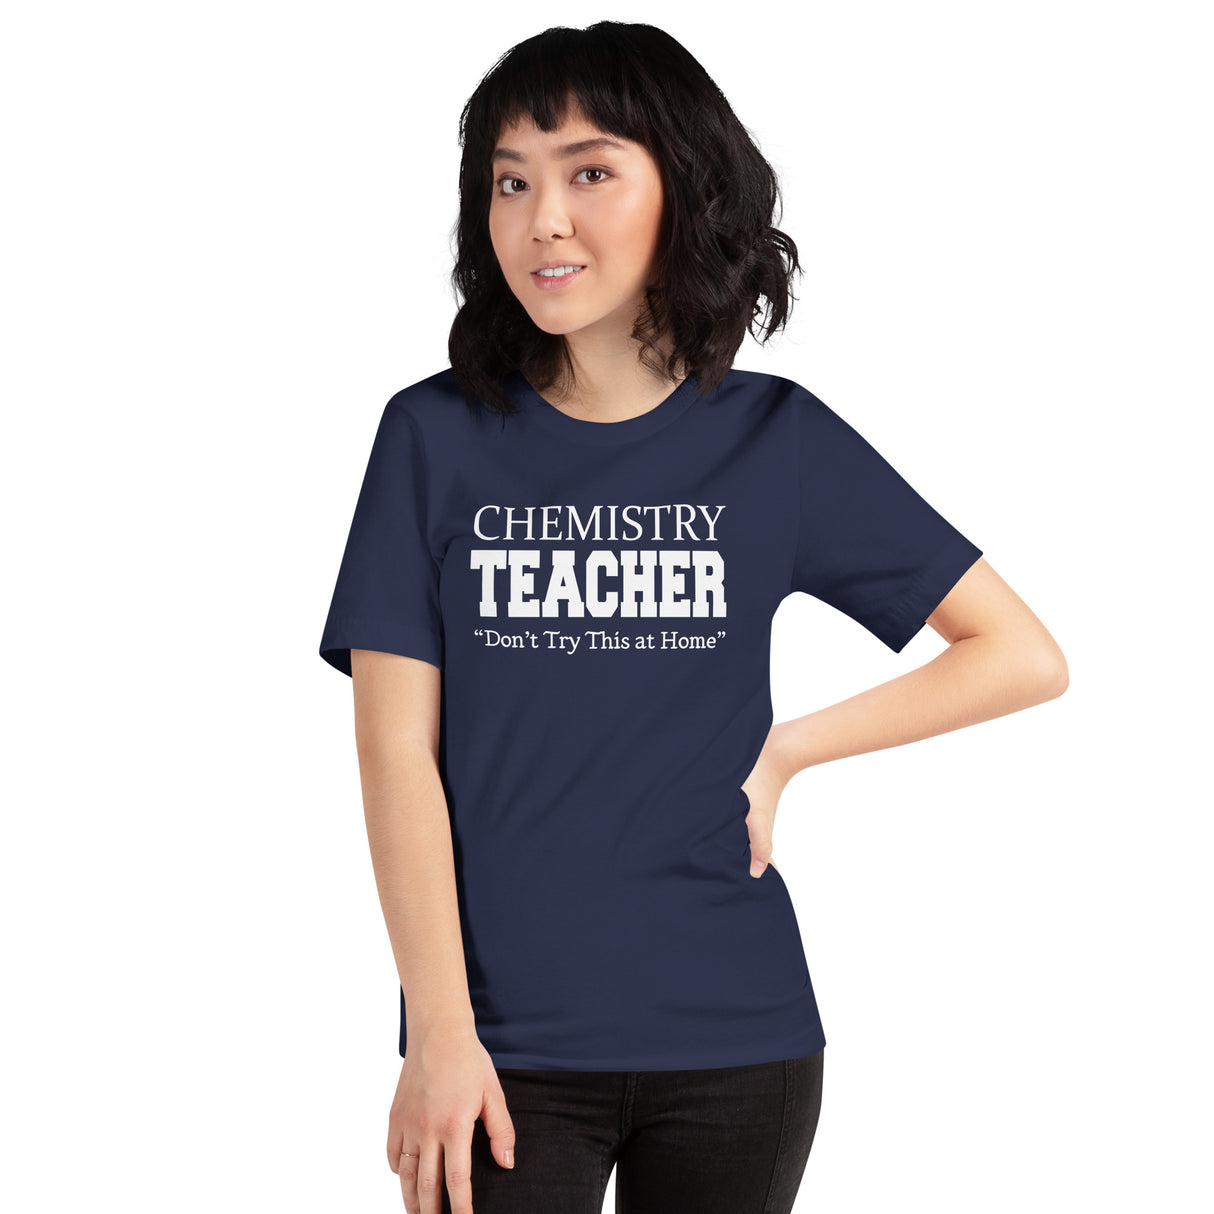 Chemistry Teacher Don't Try This at Home Women's Shirt